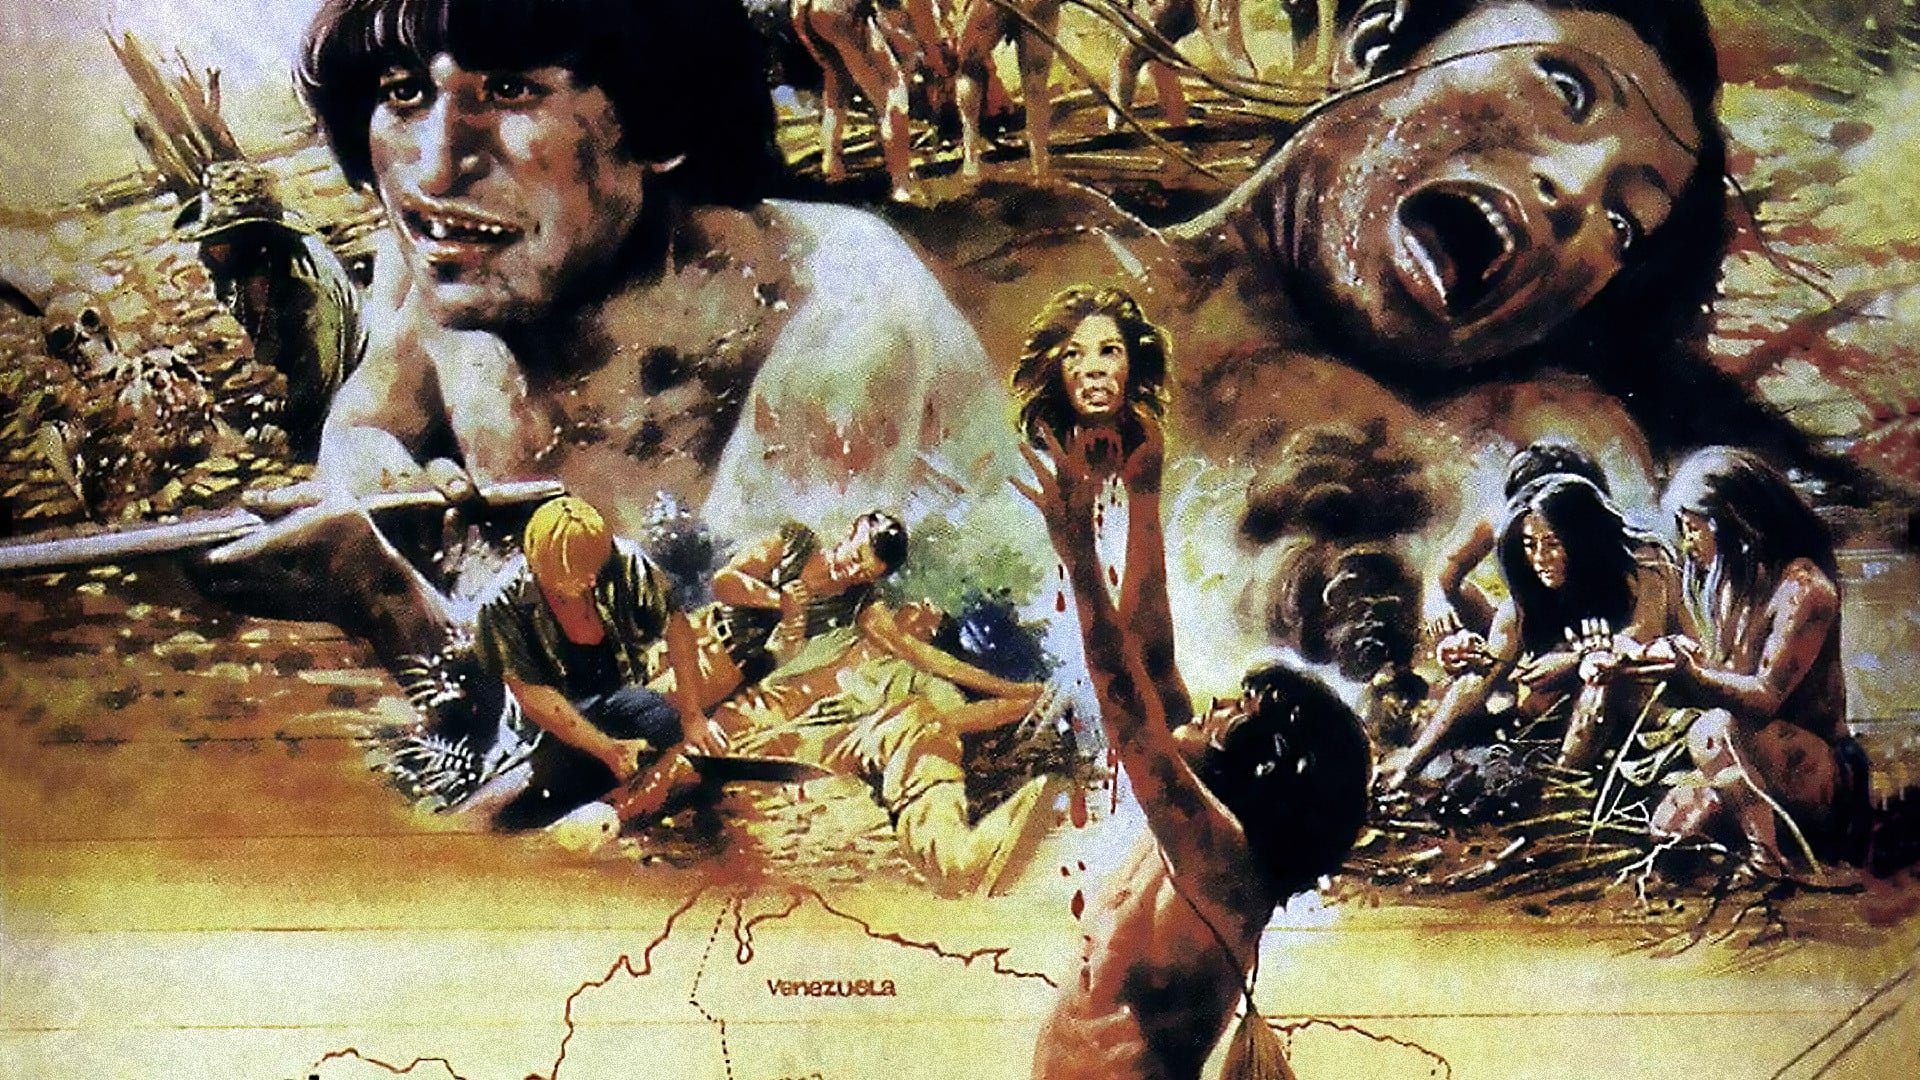 cannibal holocaust 1980 full movie 480p download